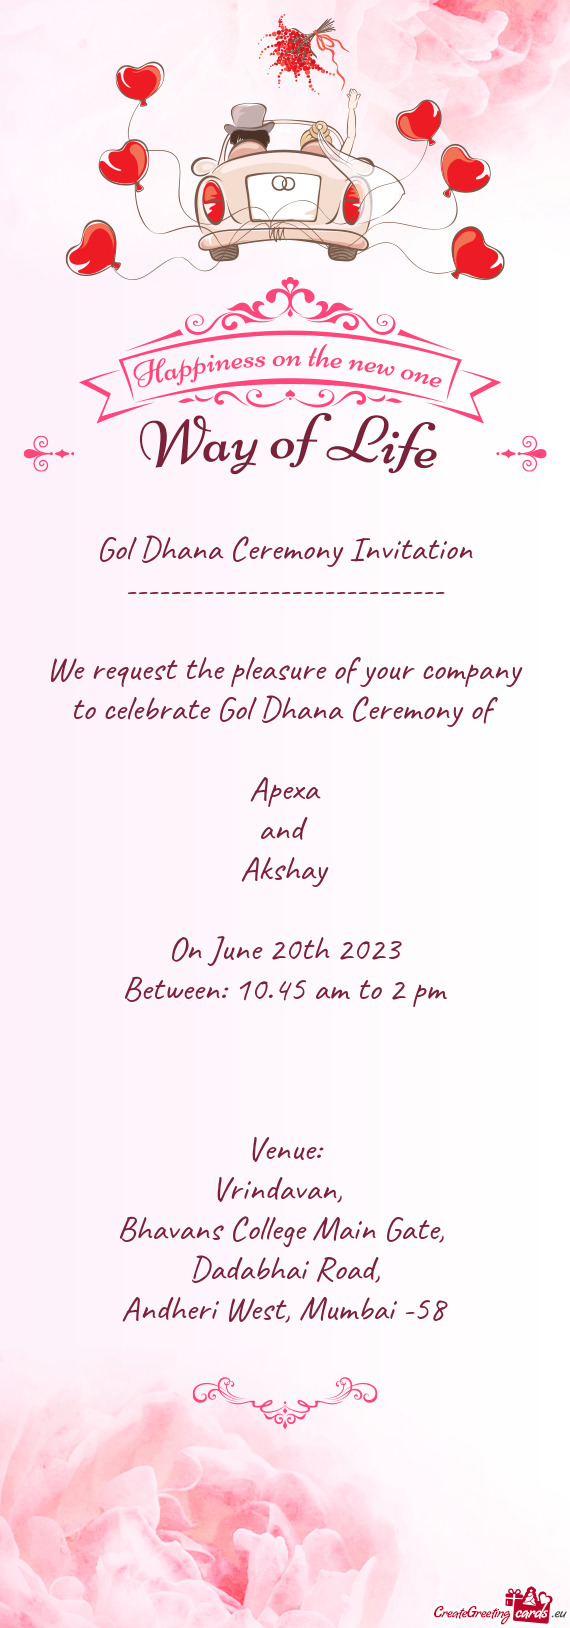 Gol Dhana Ceremony Invitation ----------------------------- We request the pleasure of your comp